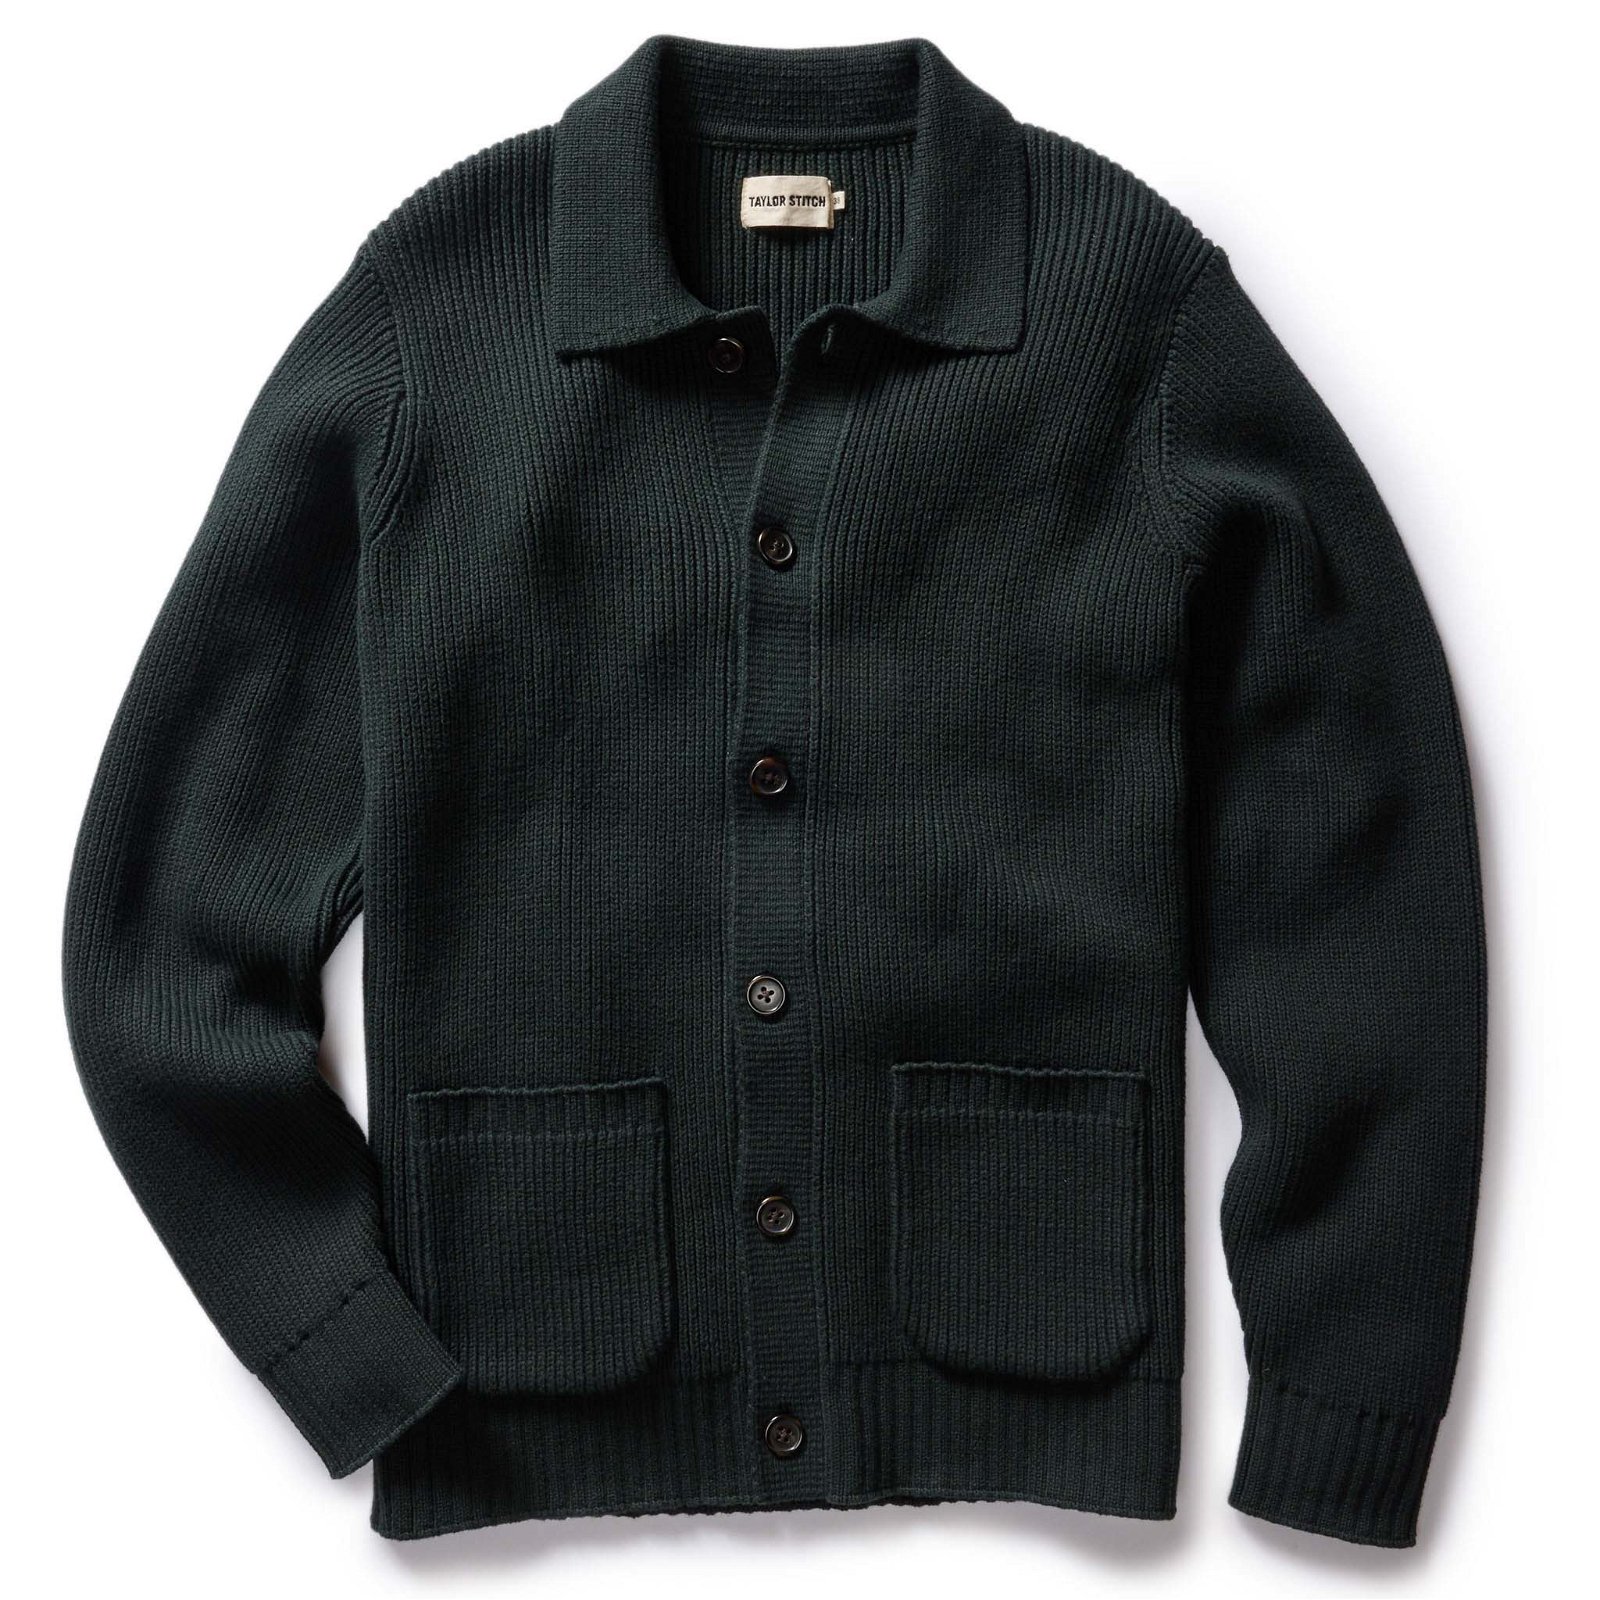 Image of The Harbor Sweater Jacket in Black Pine Heather